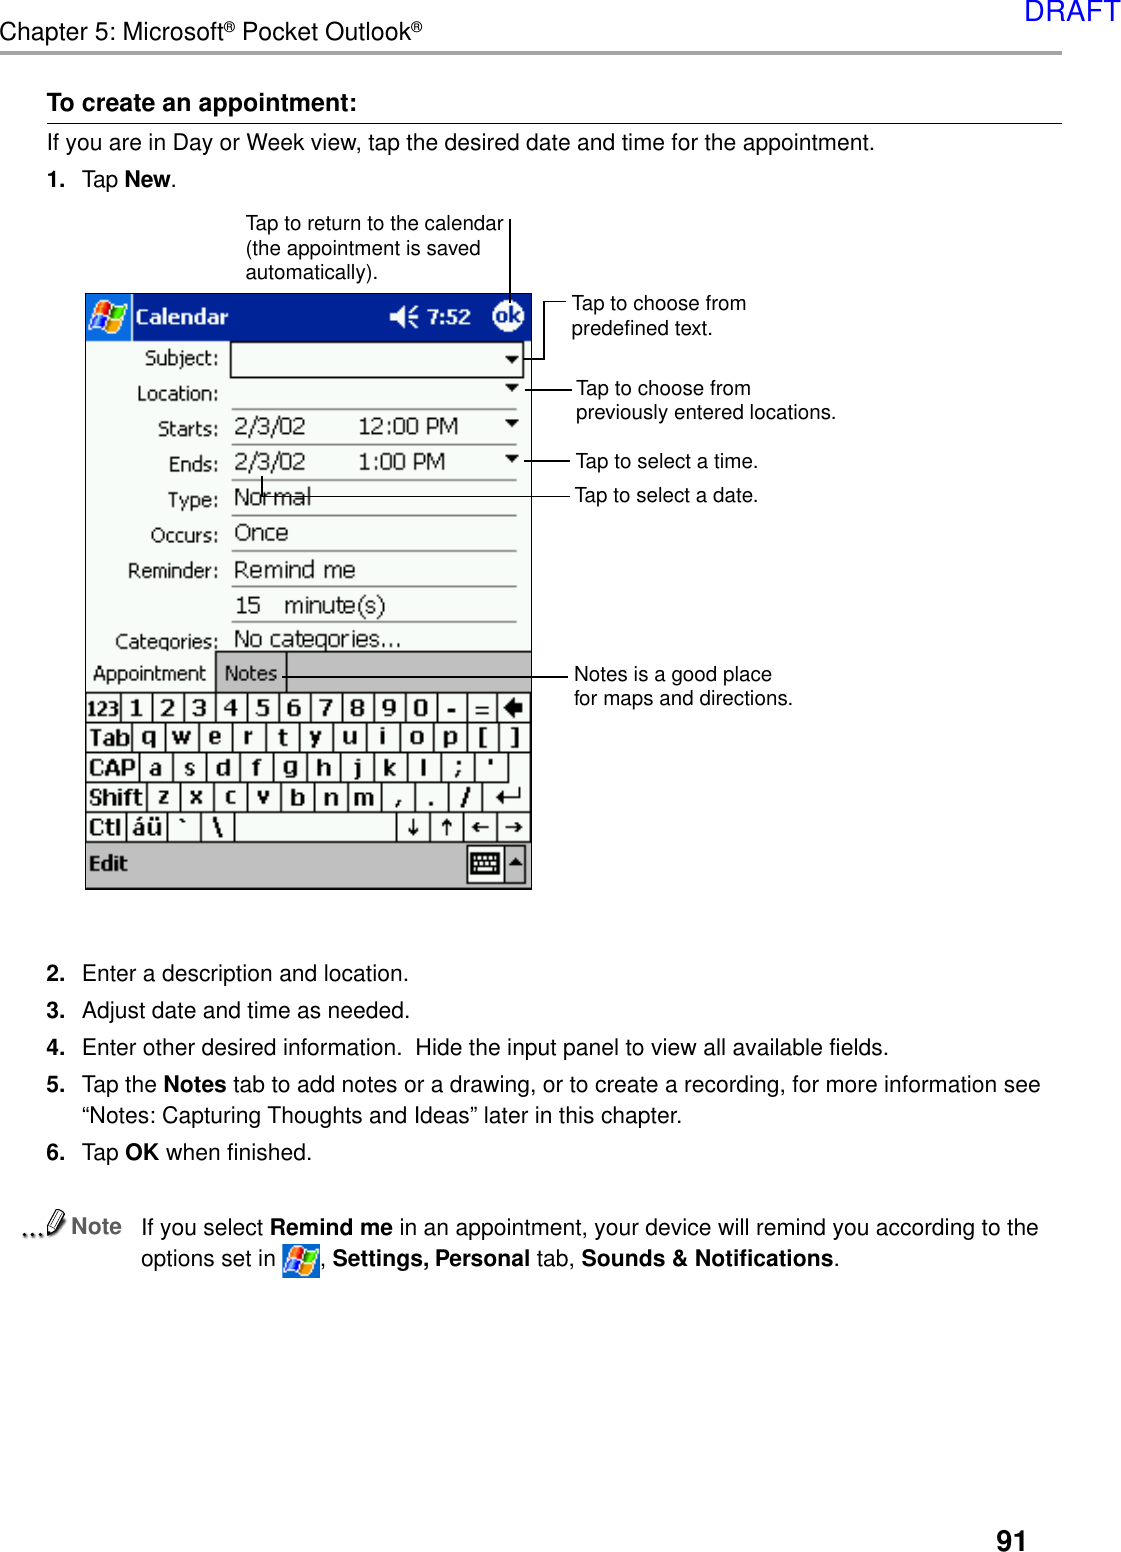 91Chapter 5: Microsoft® Pocket Outlook®To create an appointment:If you are in Day or Week view, tap the desired date and time for the appointment.1. Tap New.2. Enter a description and location.3. Adjust date and time as needed.4. Enter other desired information.  Hide the input panel to view all available fields.5. Tap the Notes tab to add notes or a drawing, or to create a recording, for more information see“Notes: Capturing Thoughts and Ideas” later in this chapter.6. Tap OK when finished.NoteIf you select Remind me in an appointment, your device will remind you according to theoptions set in  , Settings, Personal tab, Sounds &amp; Notifications.Tap to select a date.Tap to select a time.Tap to return to the calendar(the appointment is savedautomatically).Tap to choose frompreviously entered locations.Tap to choose frompredefined text.Notes is a good placefor maps and directions.DRAFT